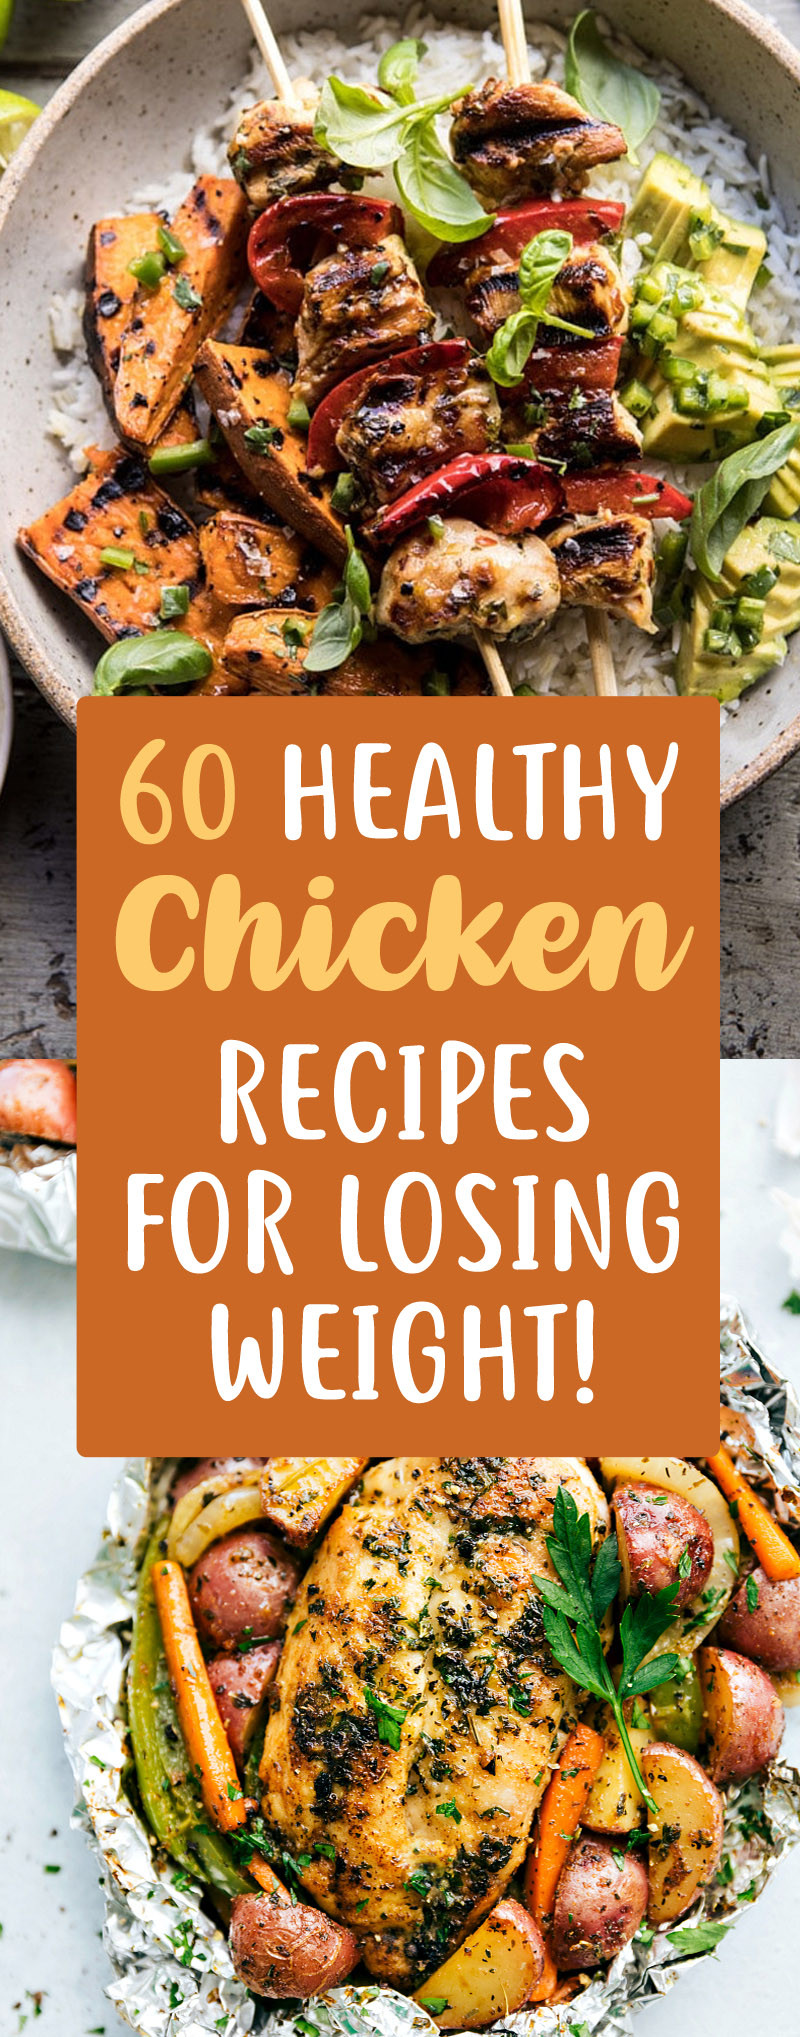 Chicken Recipes Weight Loss
 60 Insanely Delicious Chicken Recipes That Can Help You